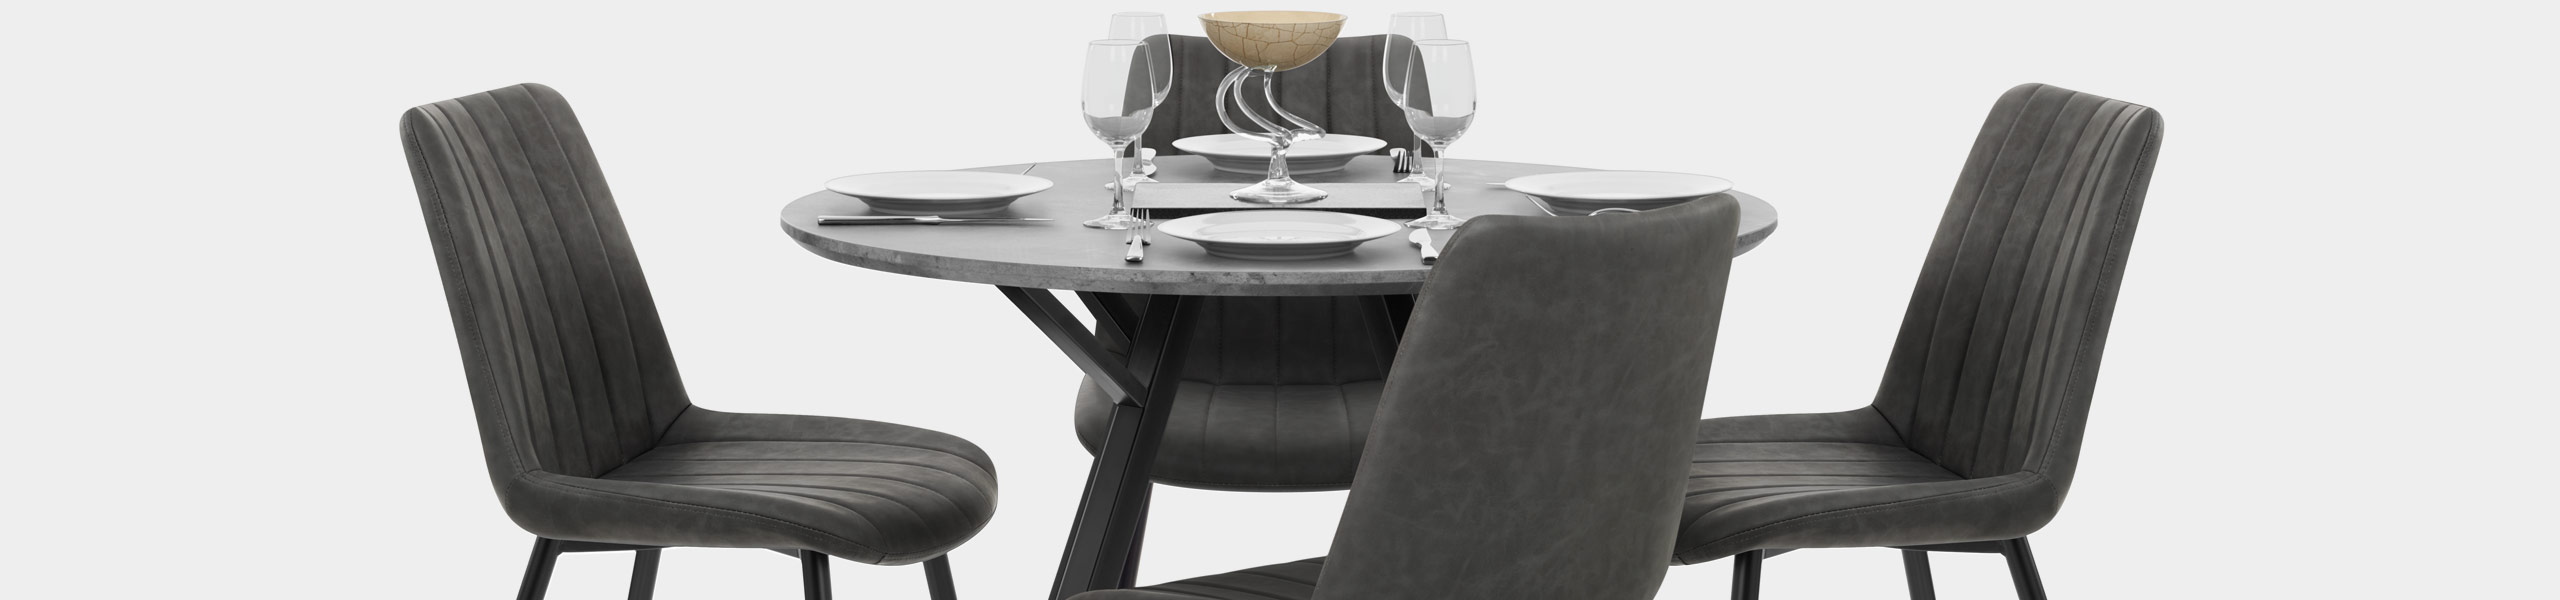 Sussex Dining Set Concrete & Charcoal Video Banner